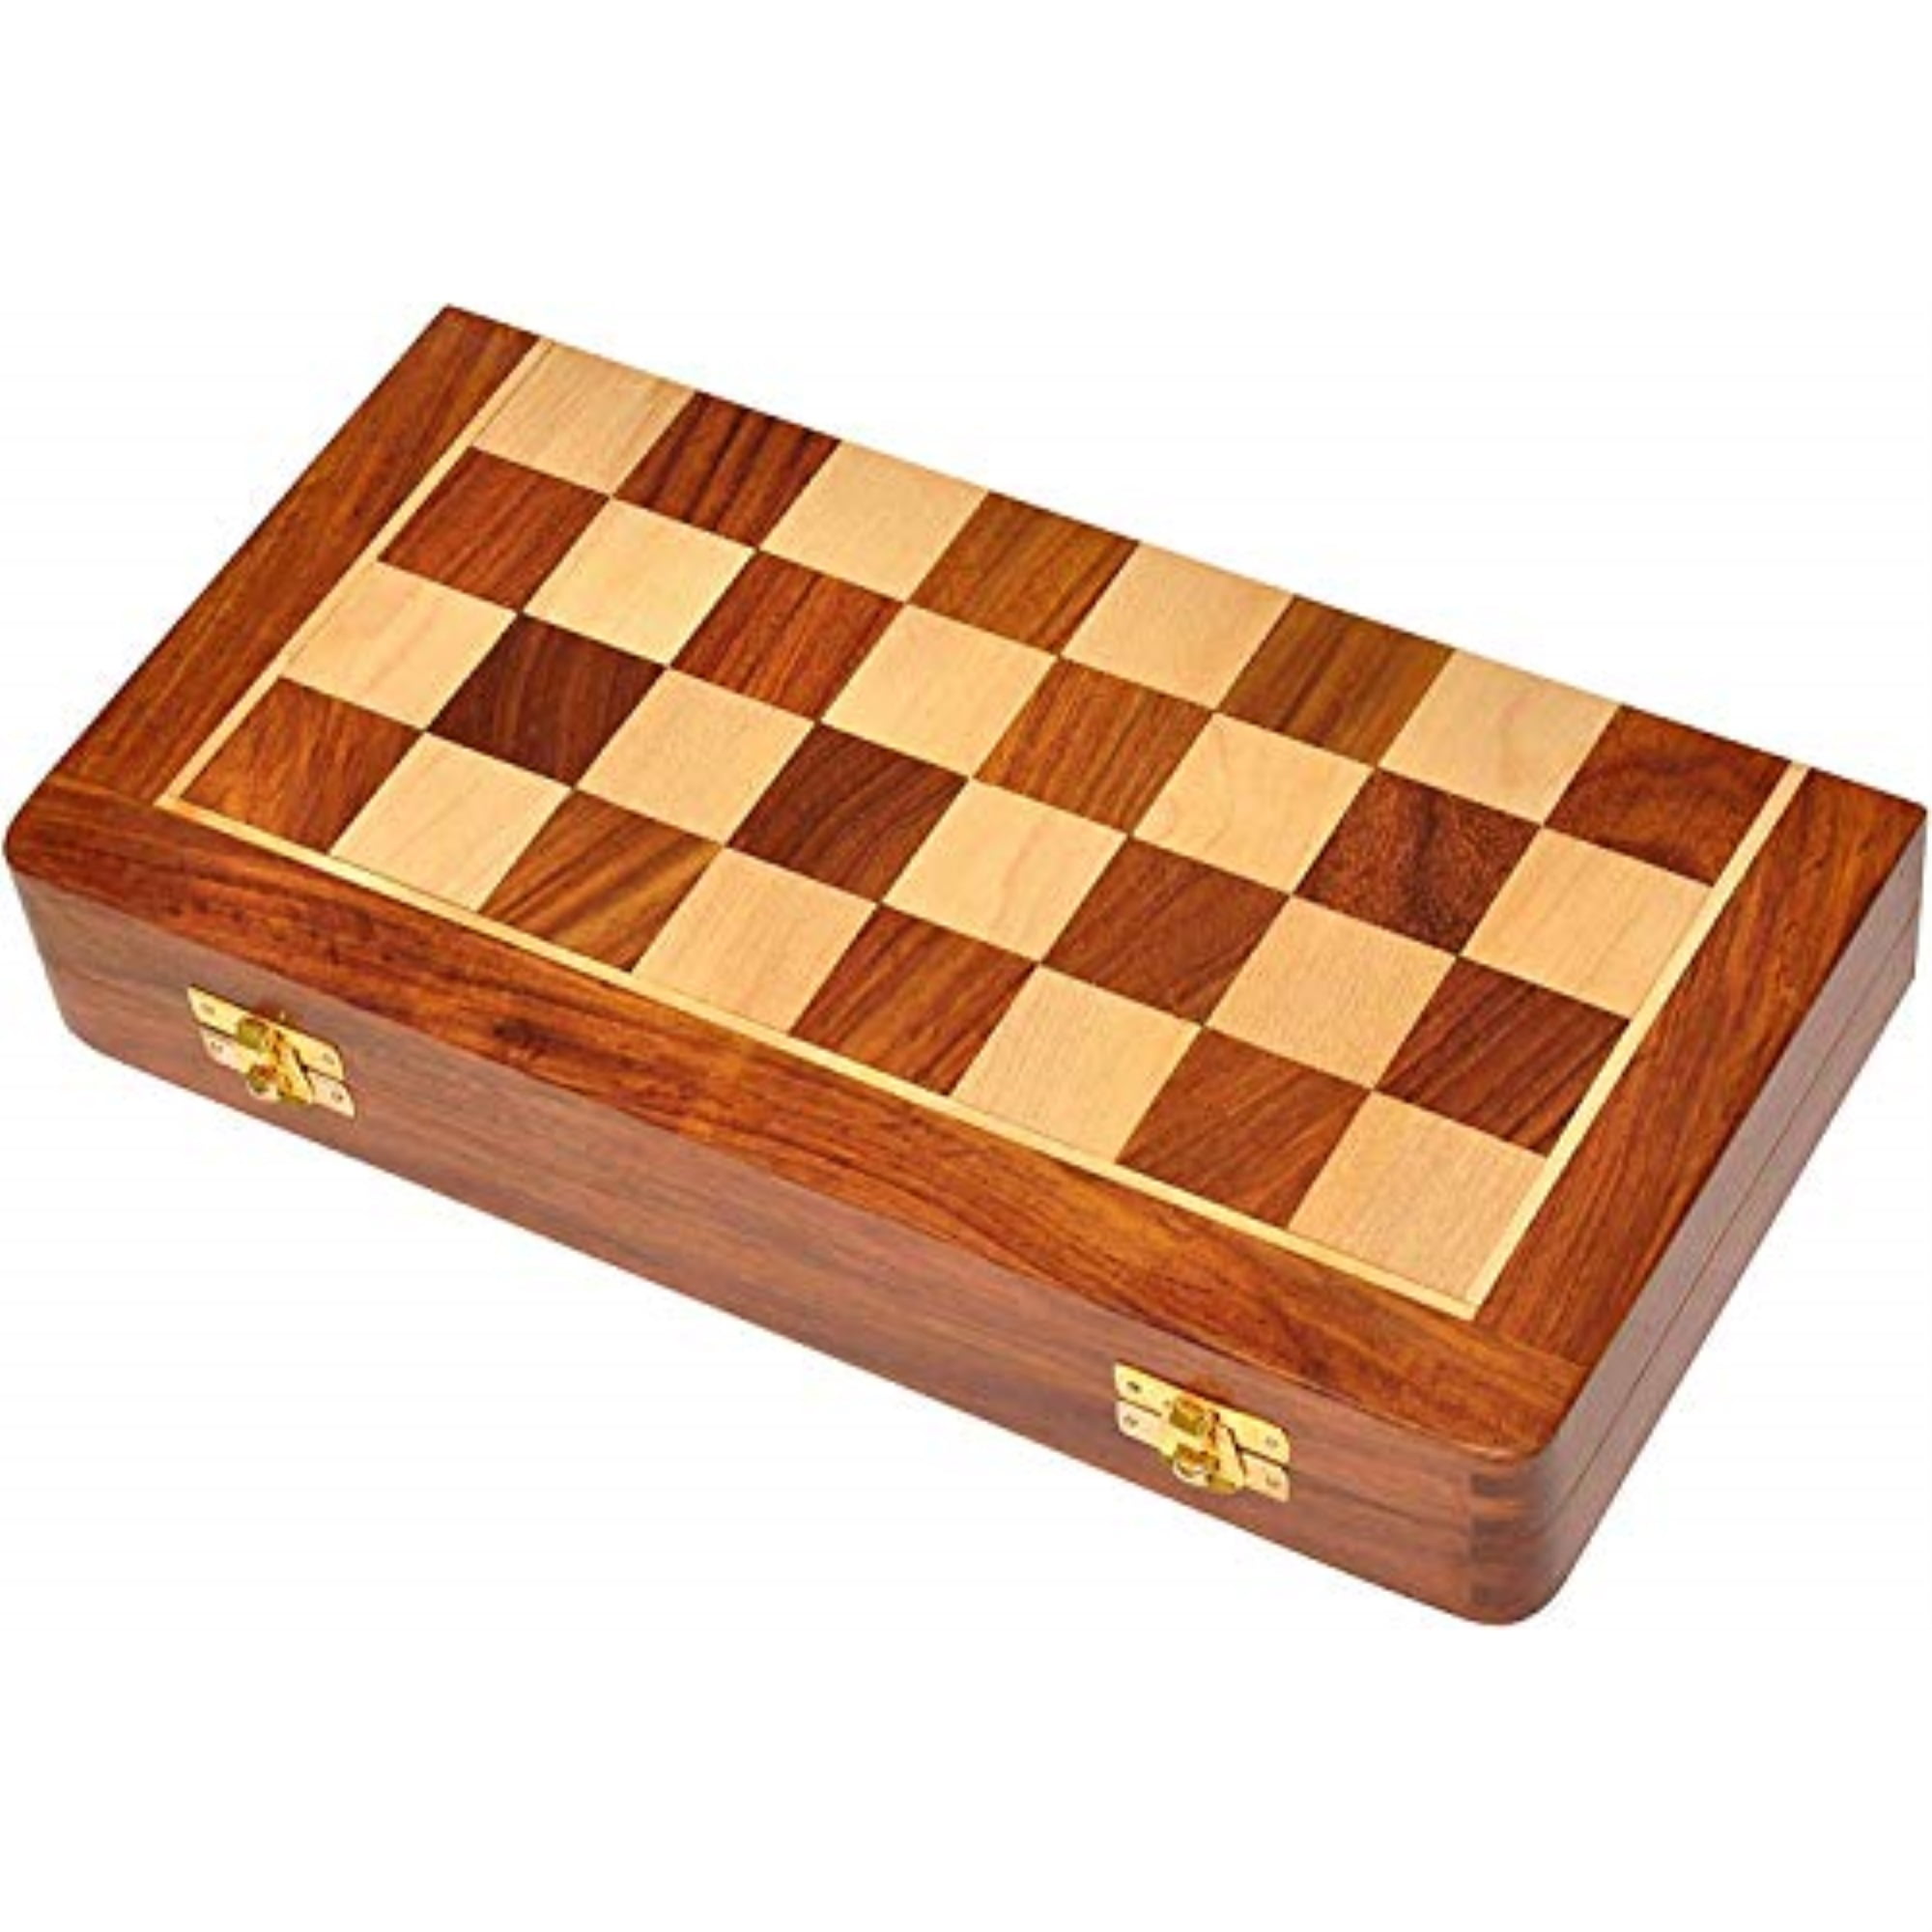 Premium Magnetic Chess Set Wooden Handmade Traveling Chess Kids Adults 